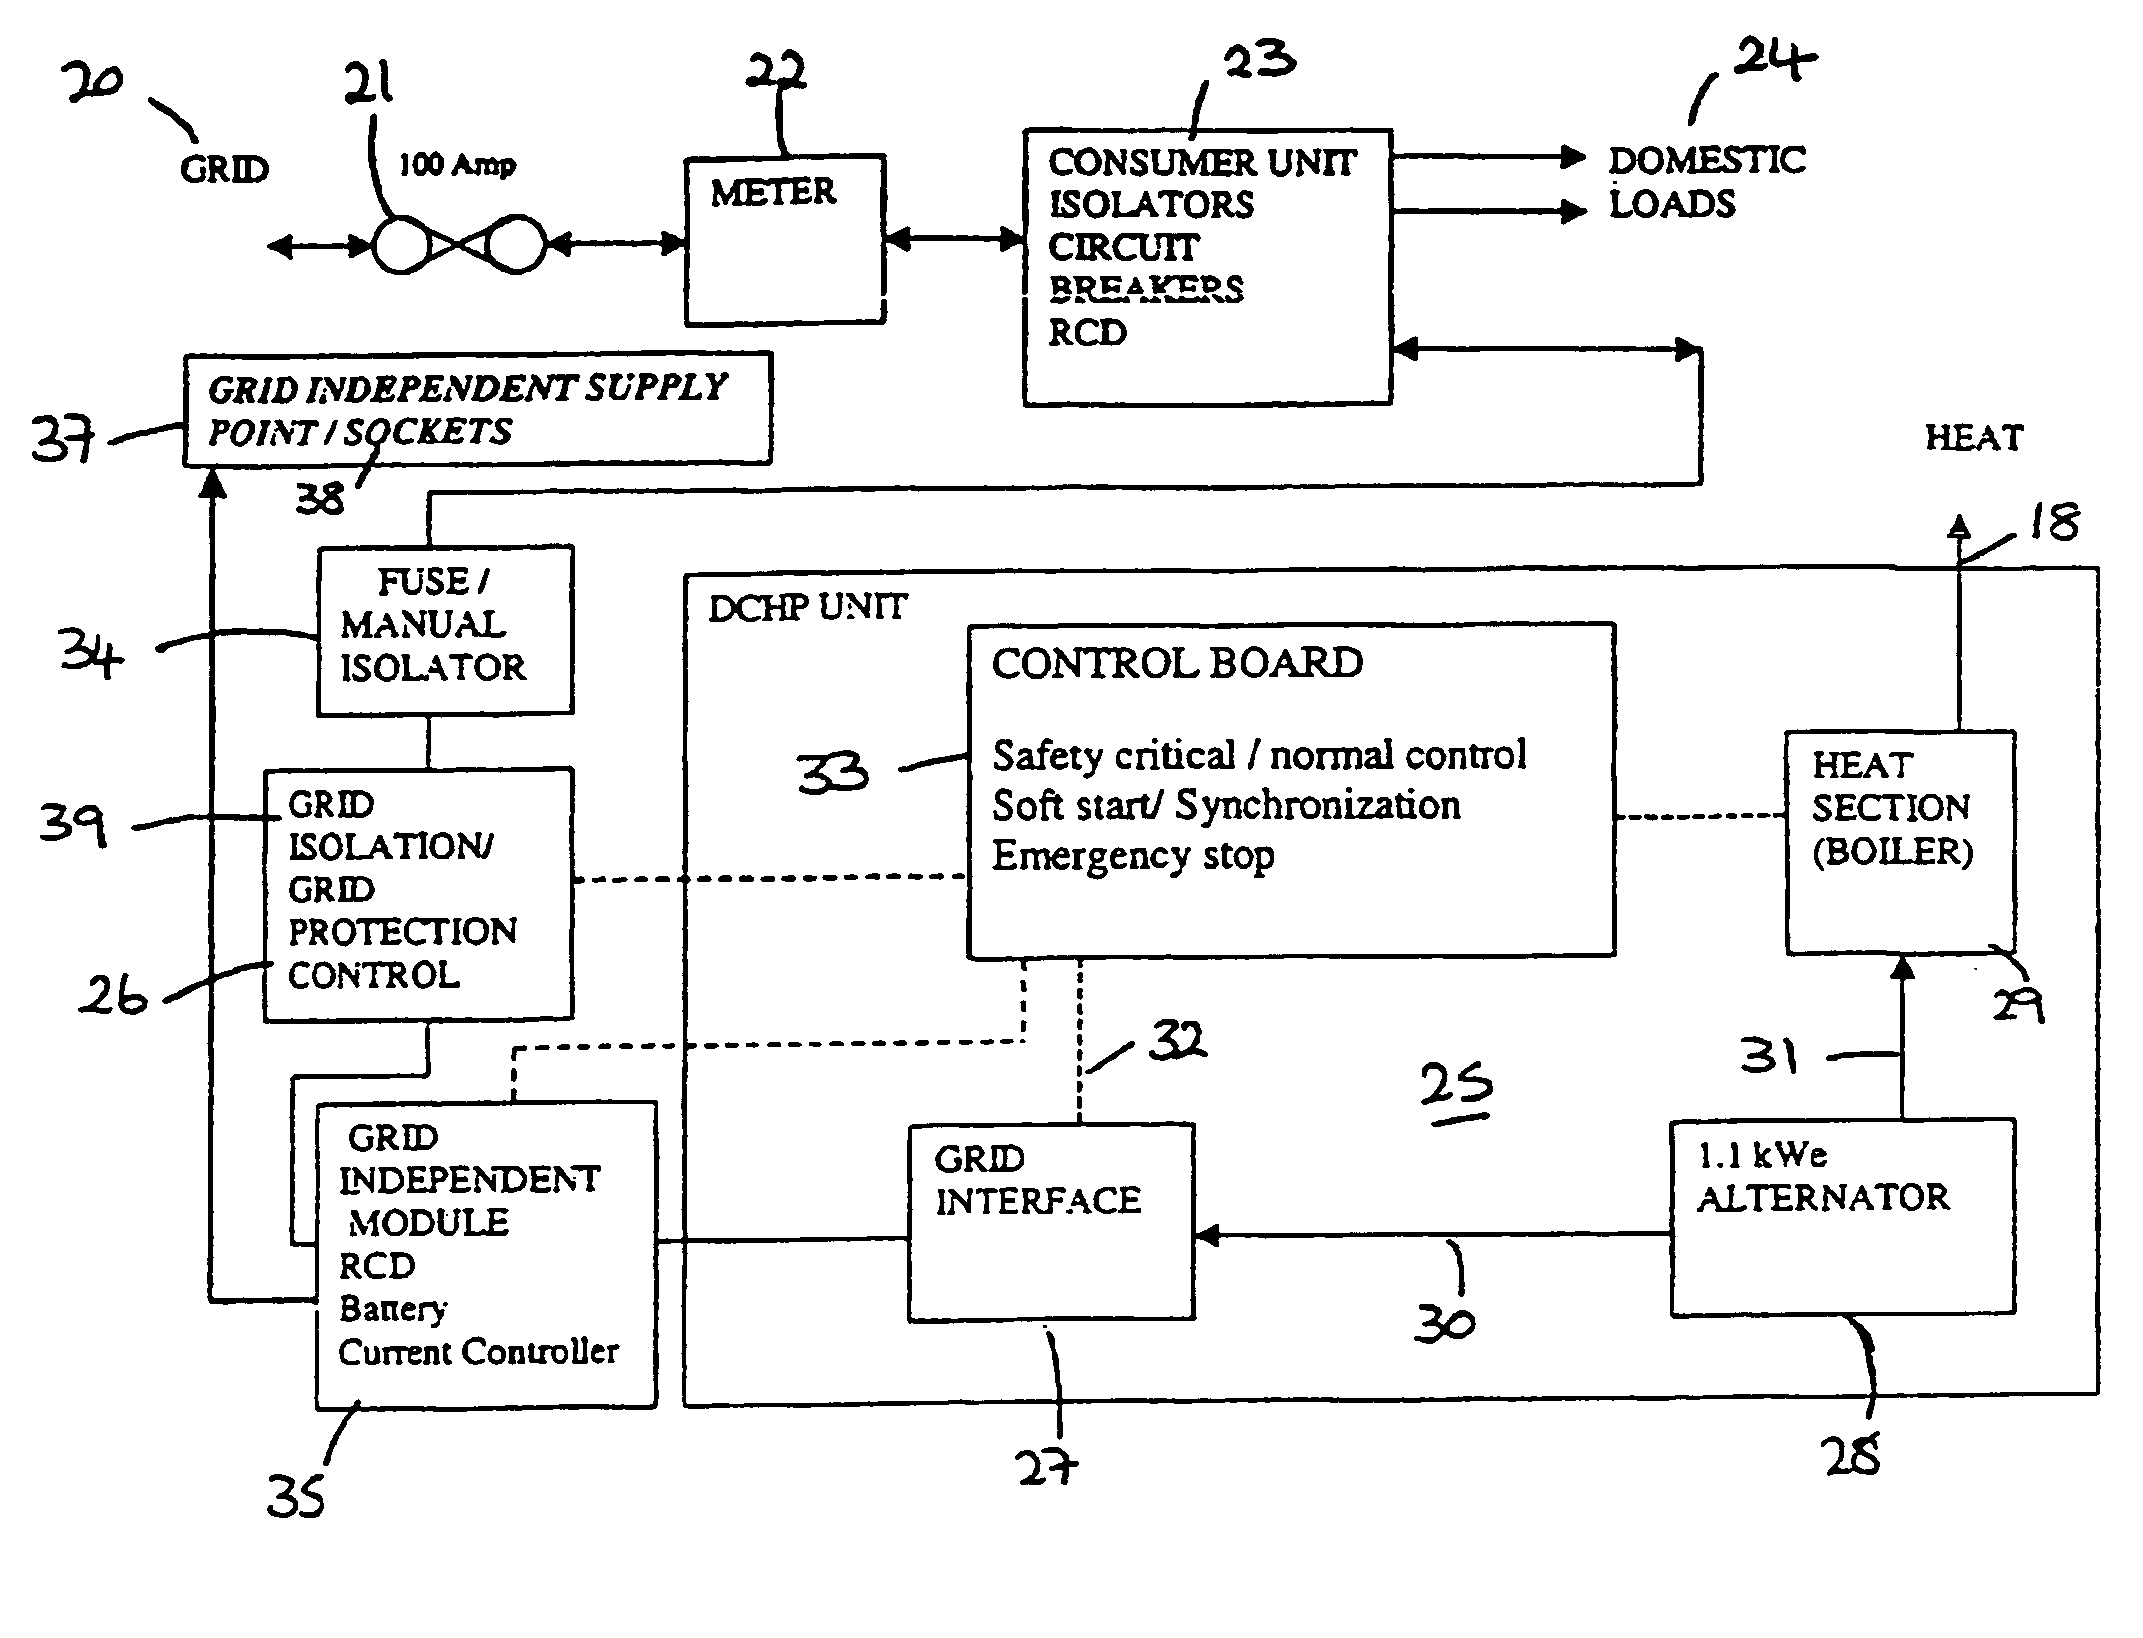 Domestic combined heat and power unit